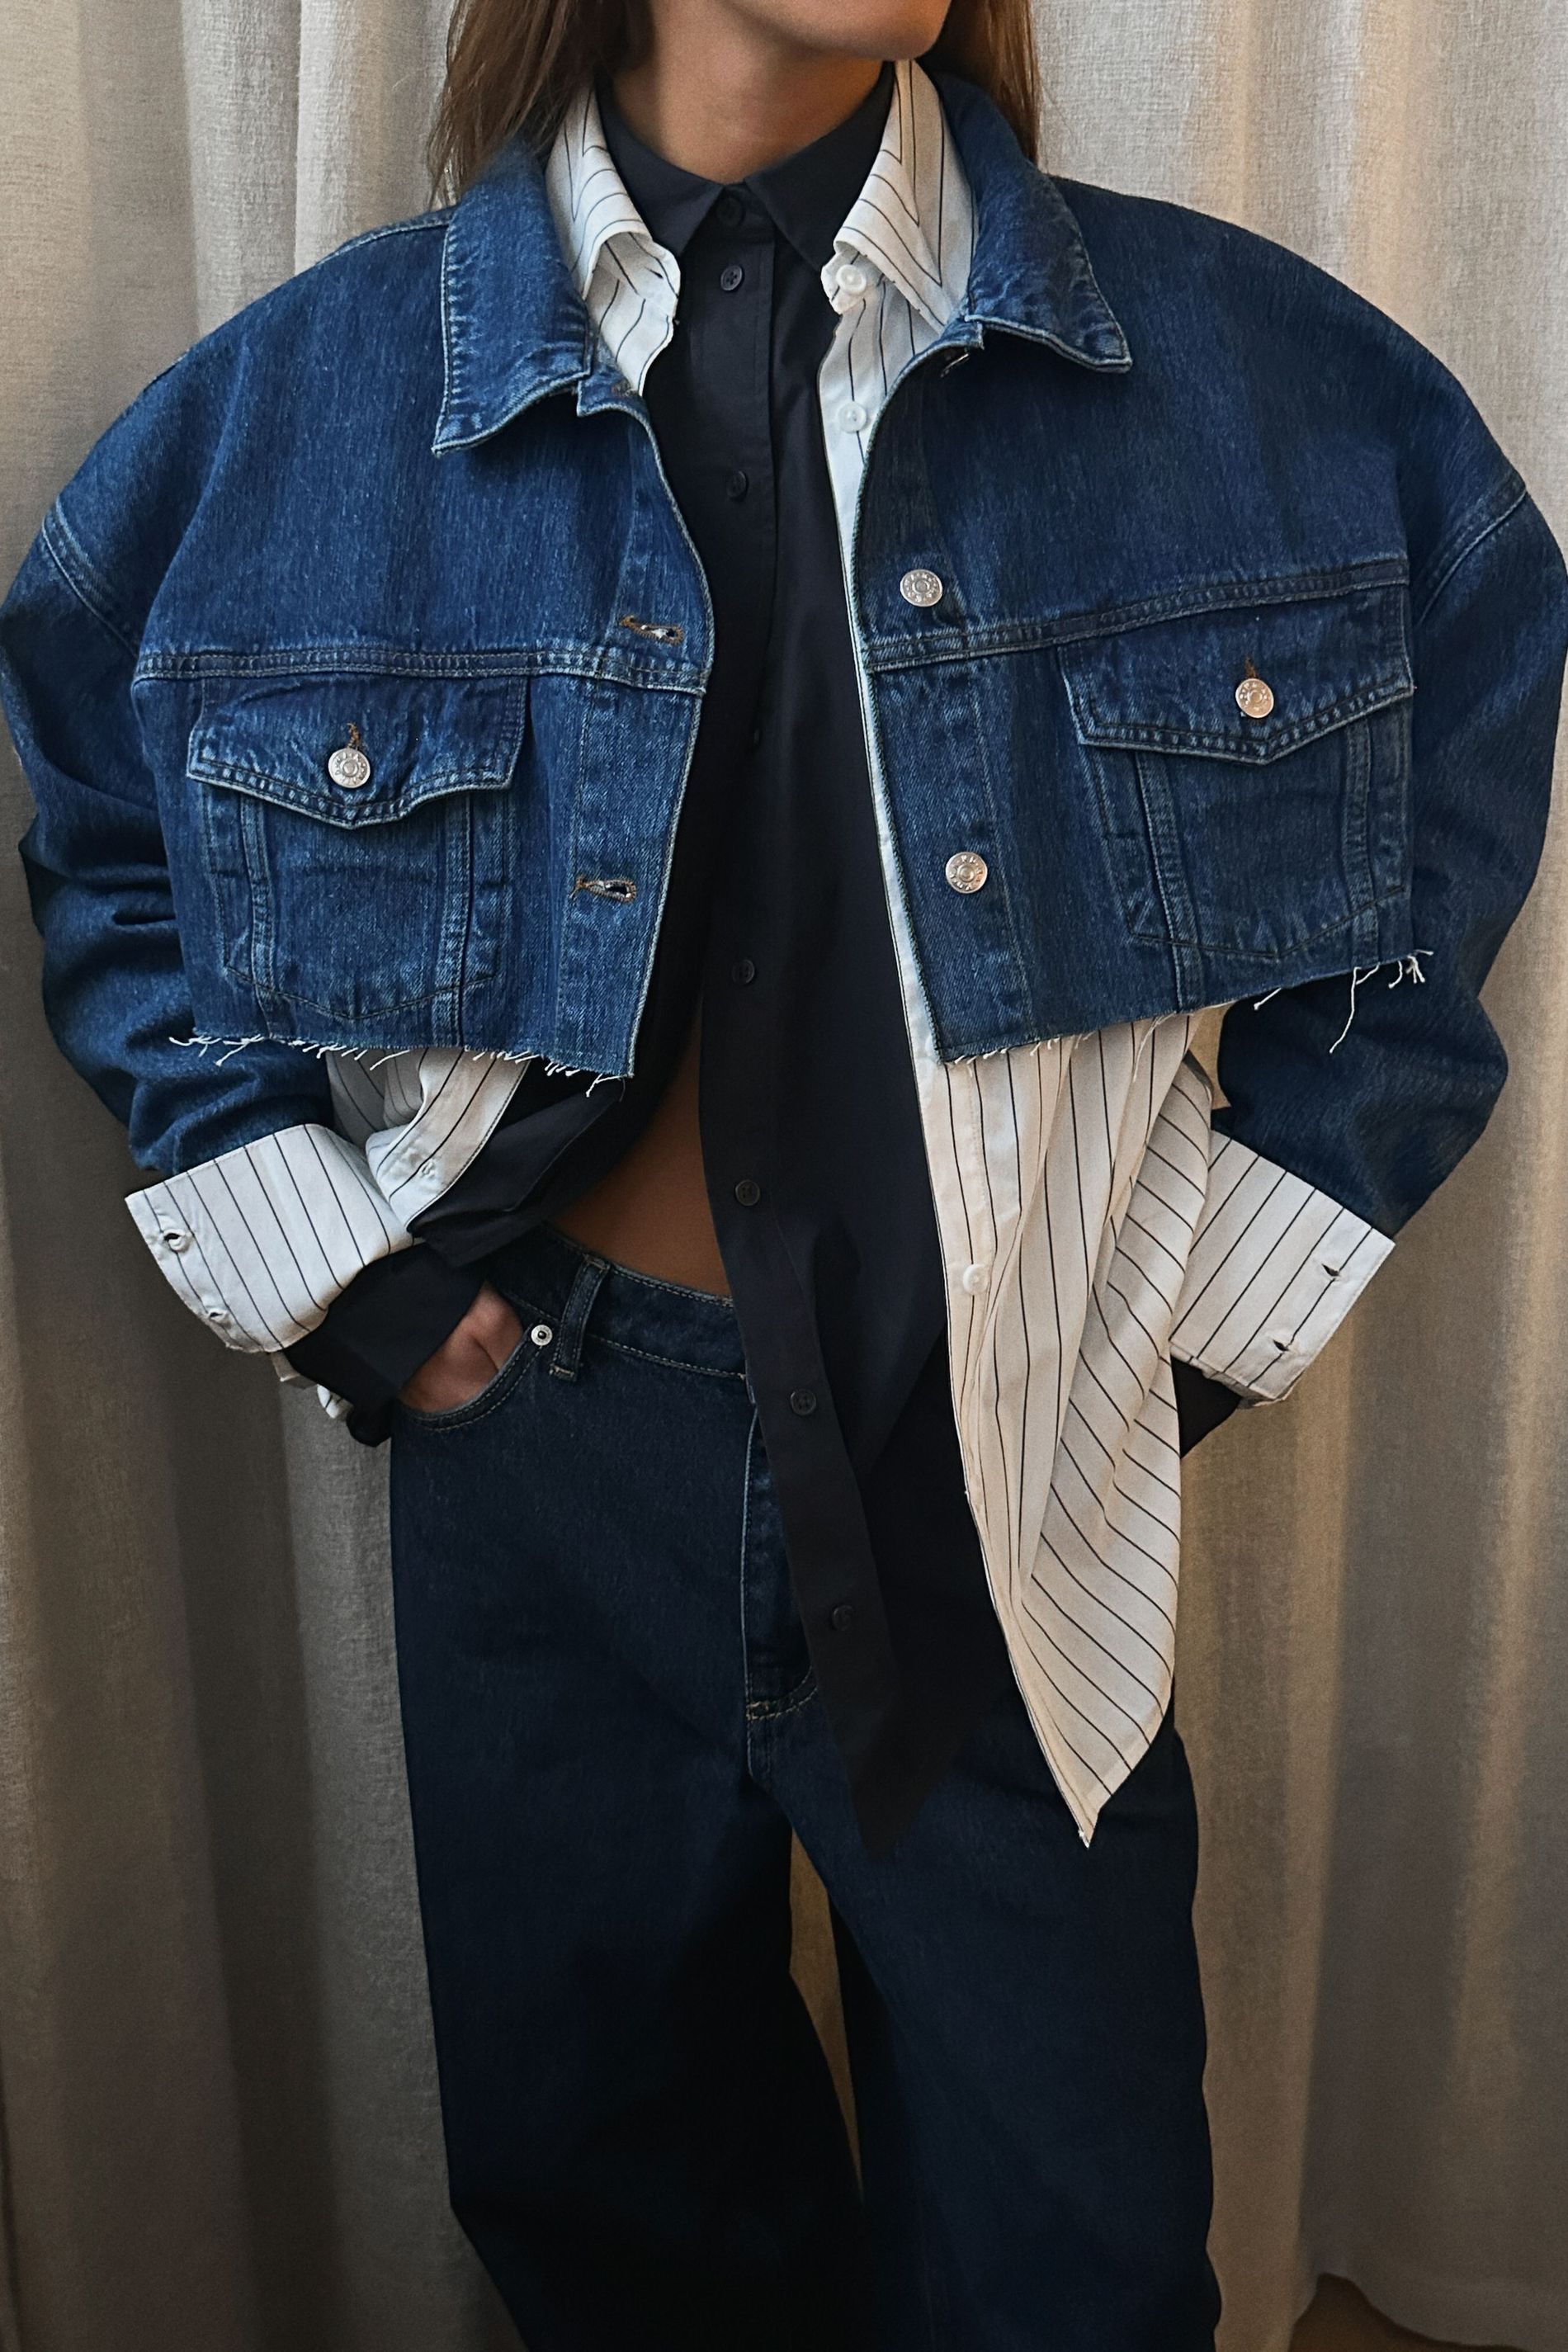 Model poses with cropped denim jacket, two shirts and a pair of jeans for NA-KD's Future Remake collection